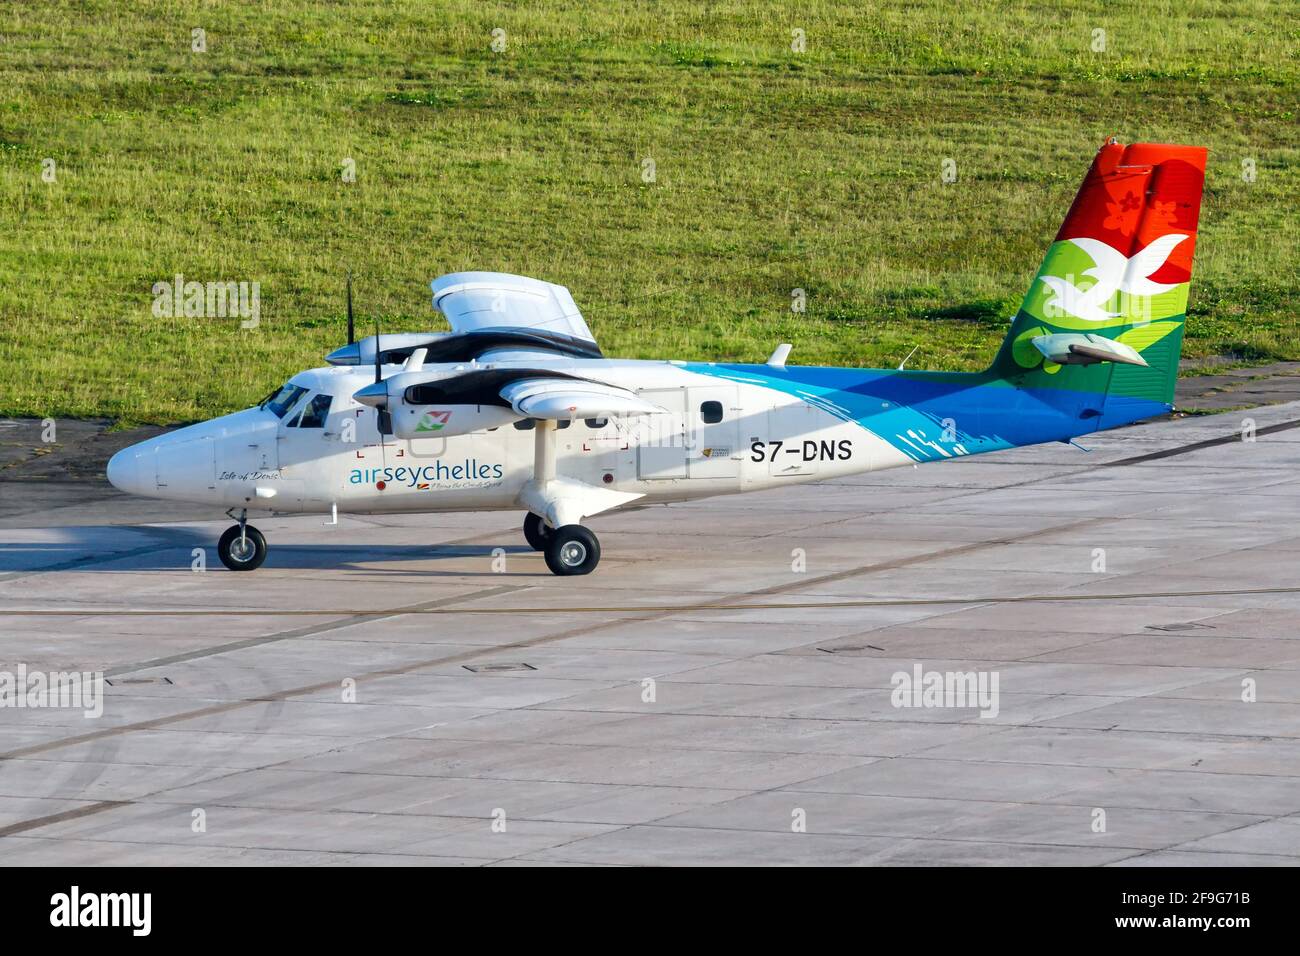 Mahe, Seychelles - November 25, 2017: Air Seychelles DHC-6-400 Twin Otter airplane at Seychelles International Airport (SEZ) in the Seychelles. Stock Photo